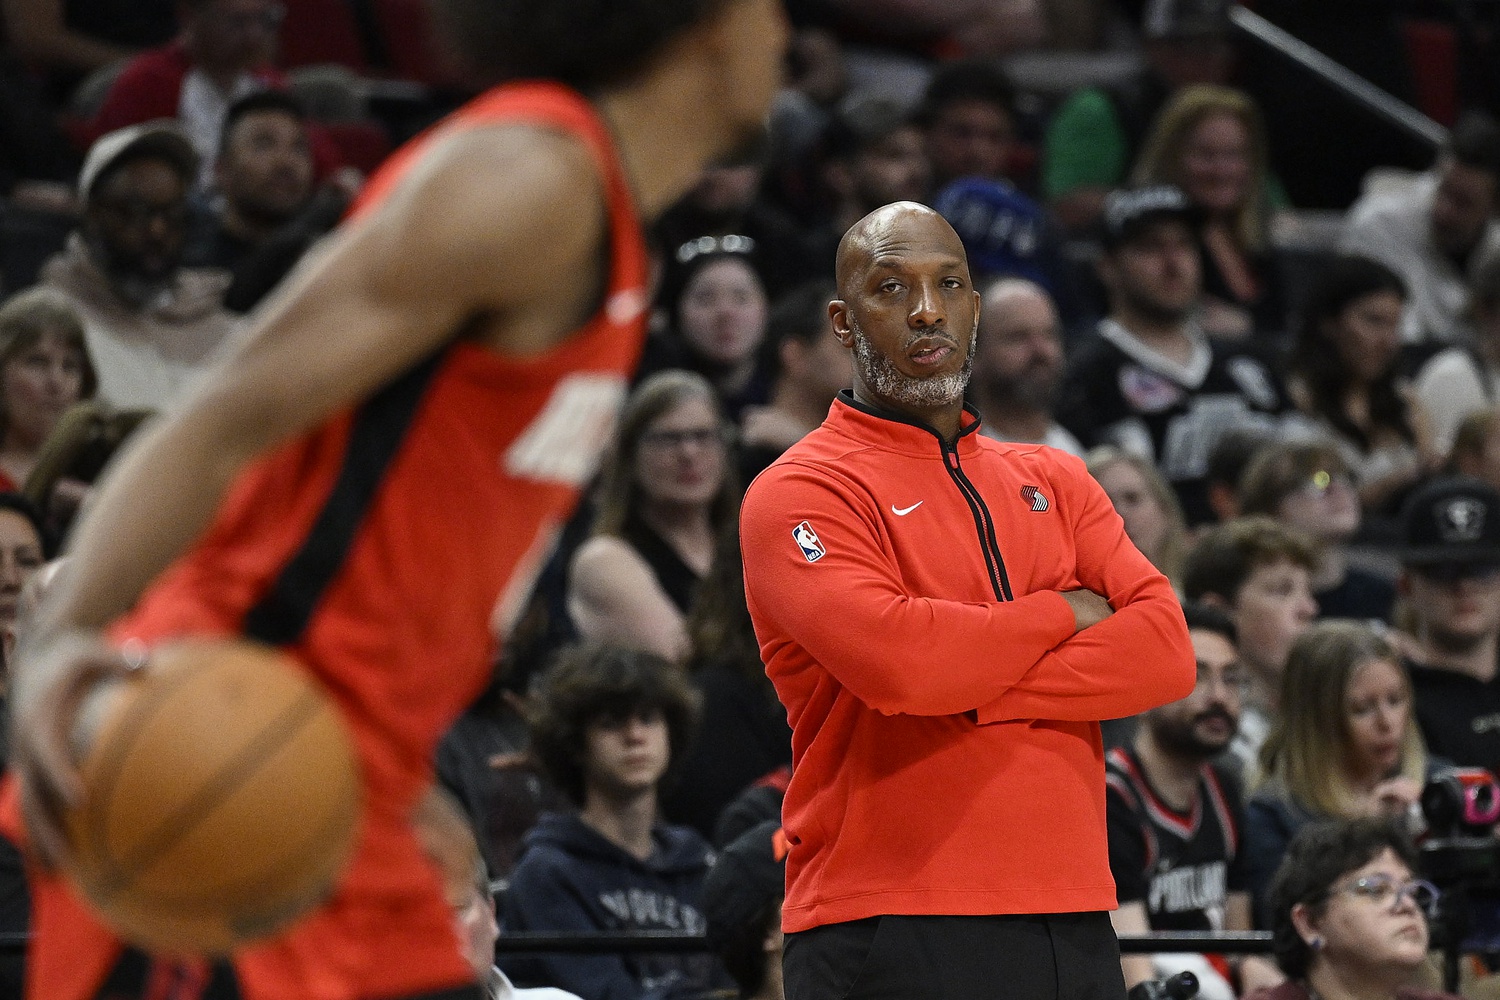 Dalano Banton is due for a contract extension from the Portland Trail Blazers.